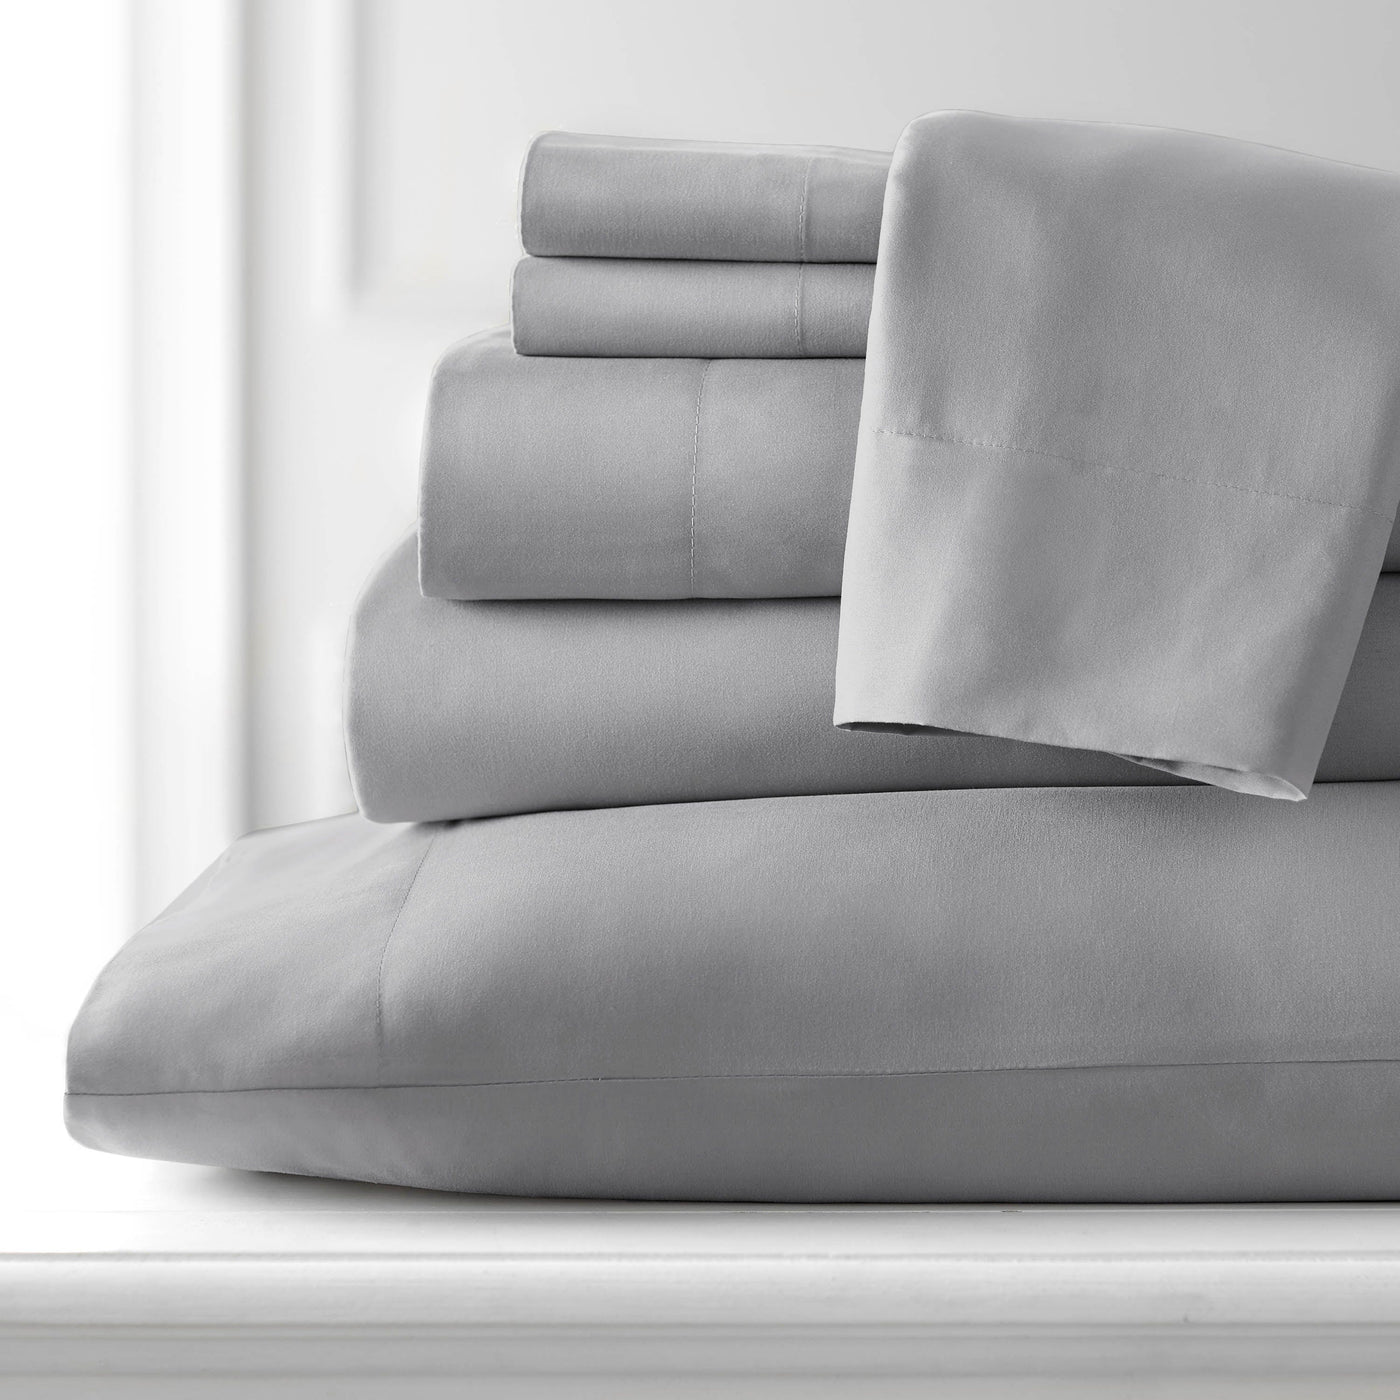 Stack Image of Everyday Essentials 6PC Sheet Set in Grey in grey#color_grey